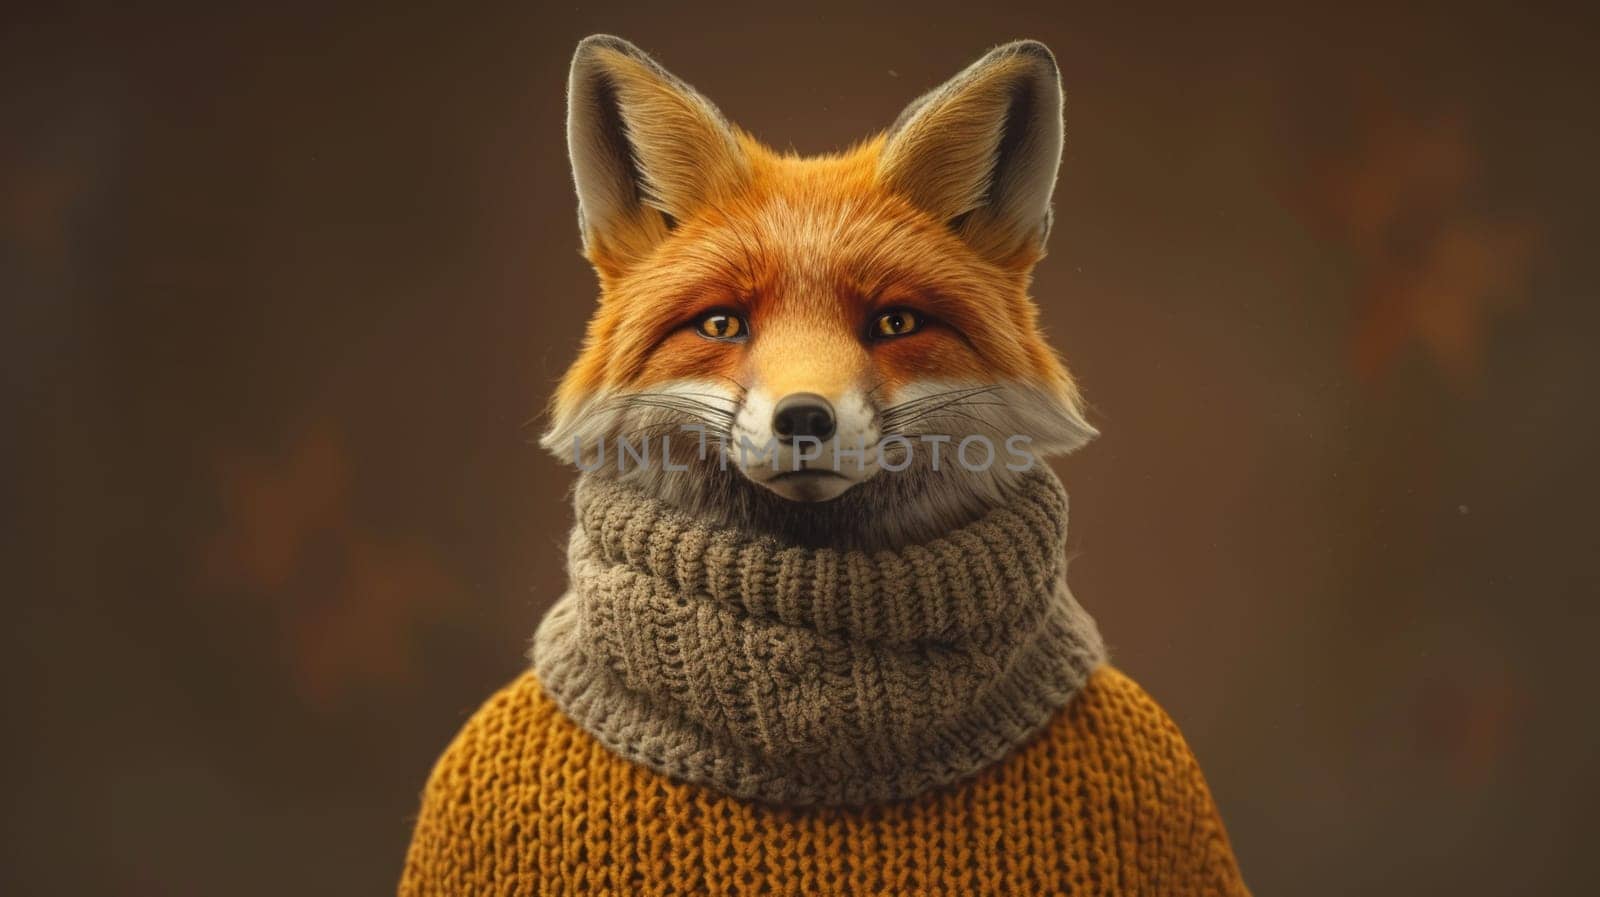 A fox wearing a sweater and scarf with its eyes closed